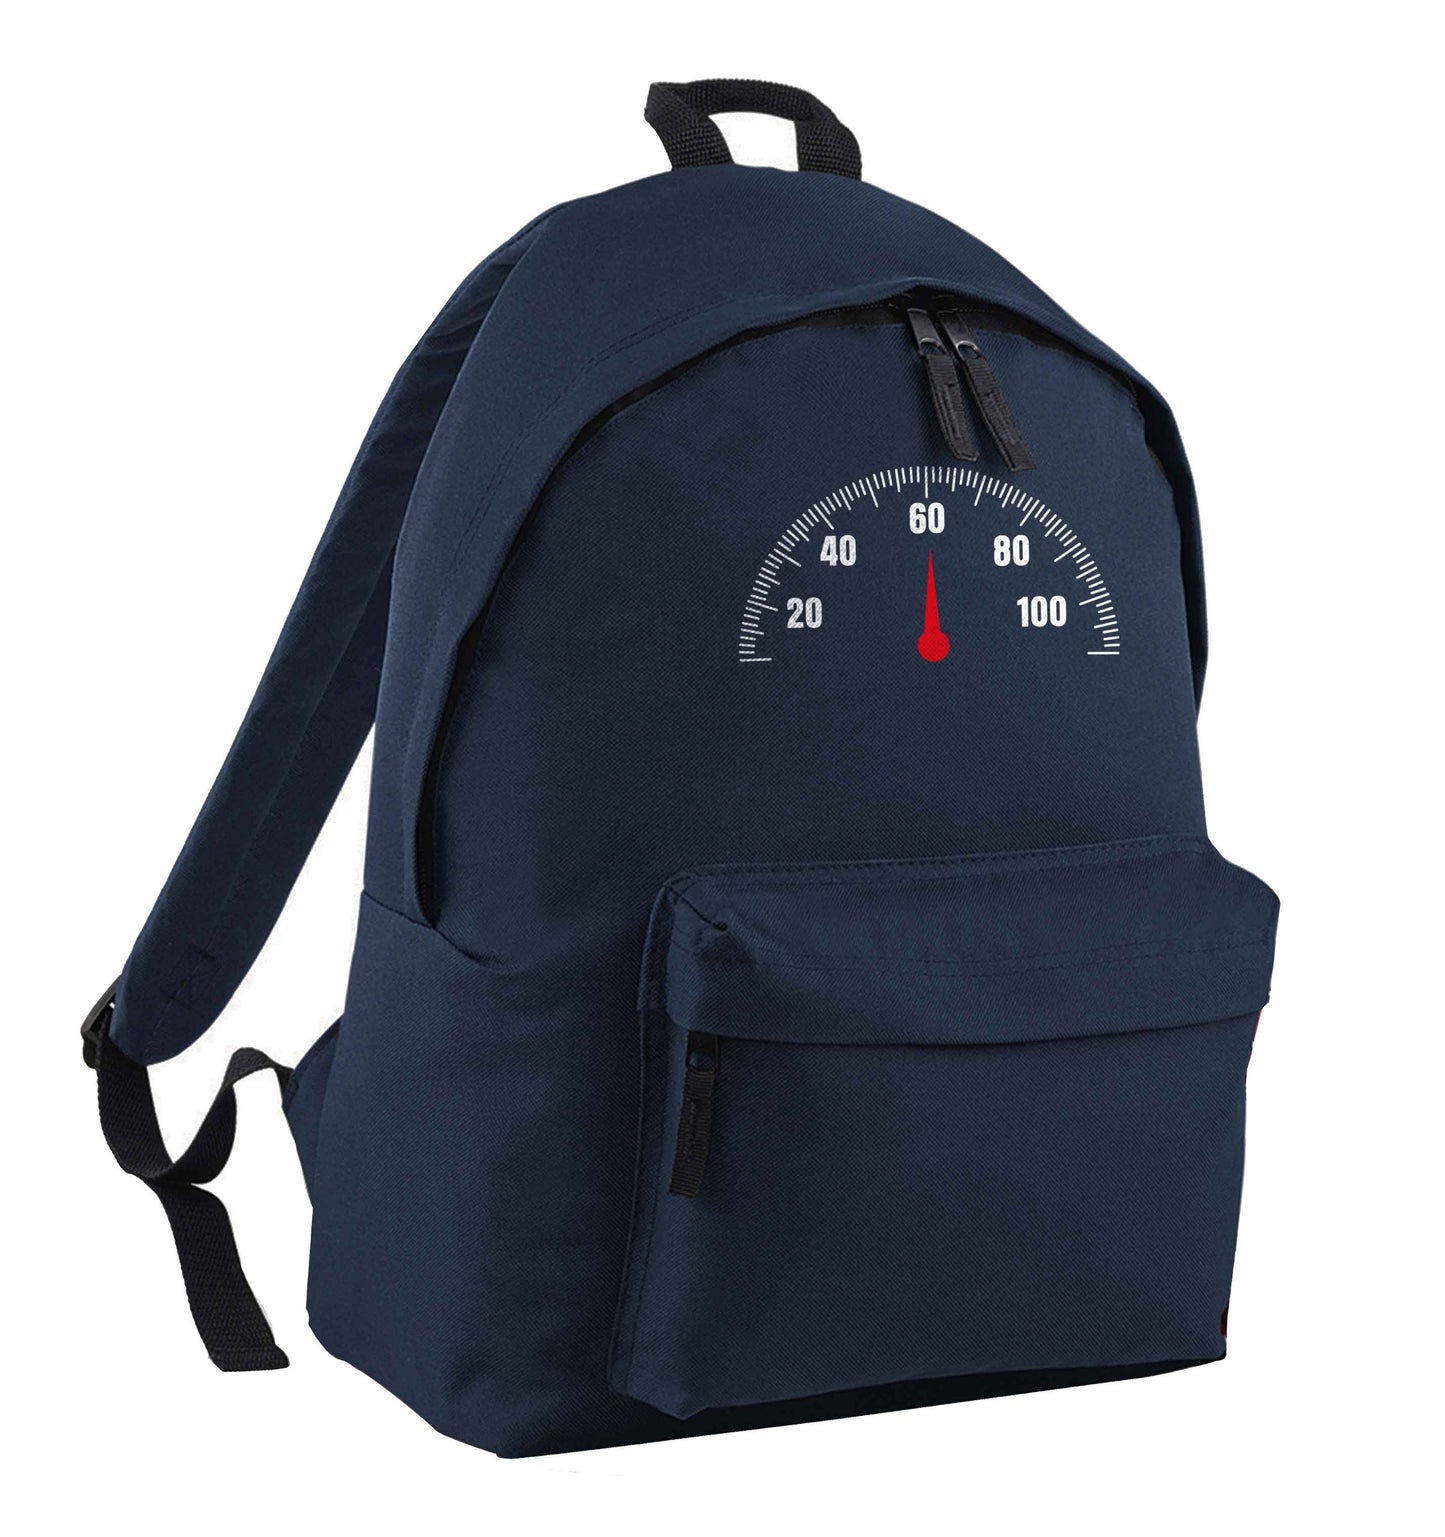 Speed dial 60 navy adults backpack